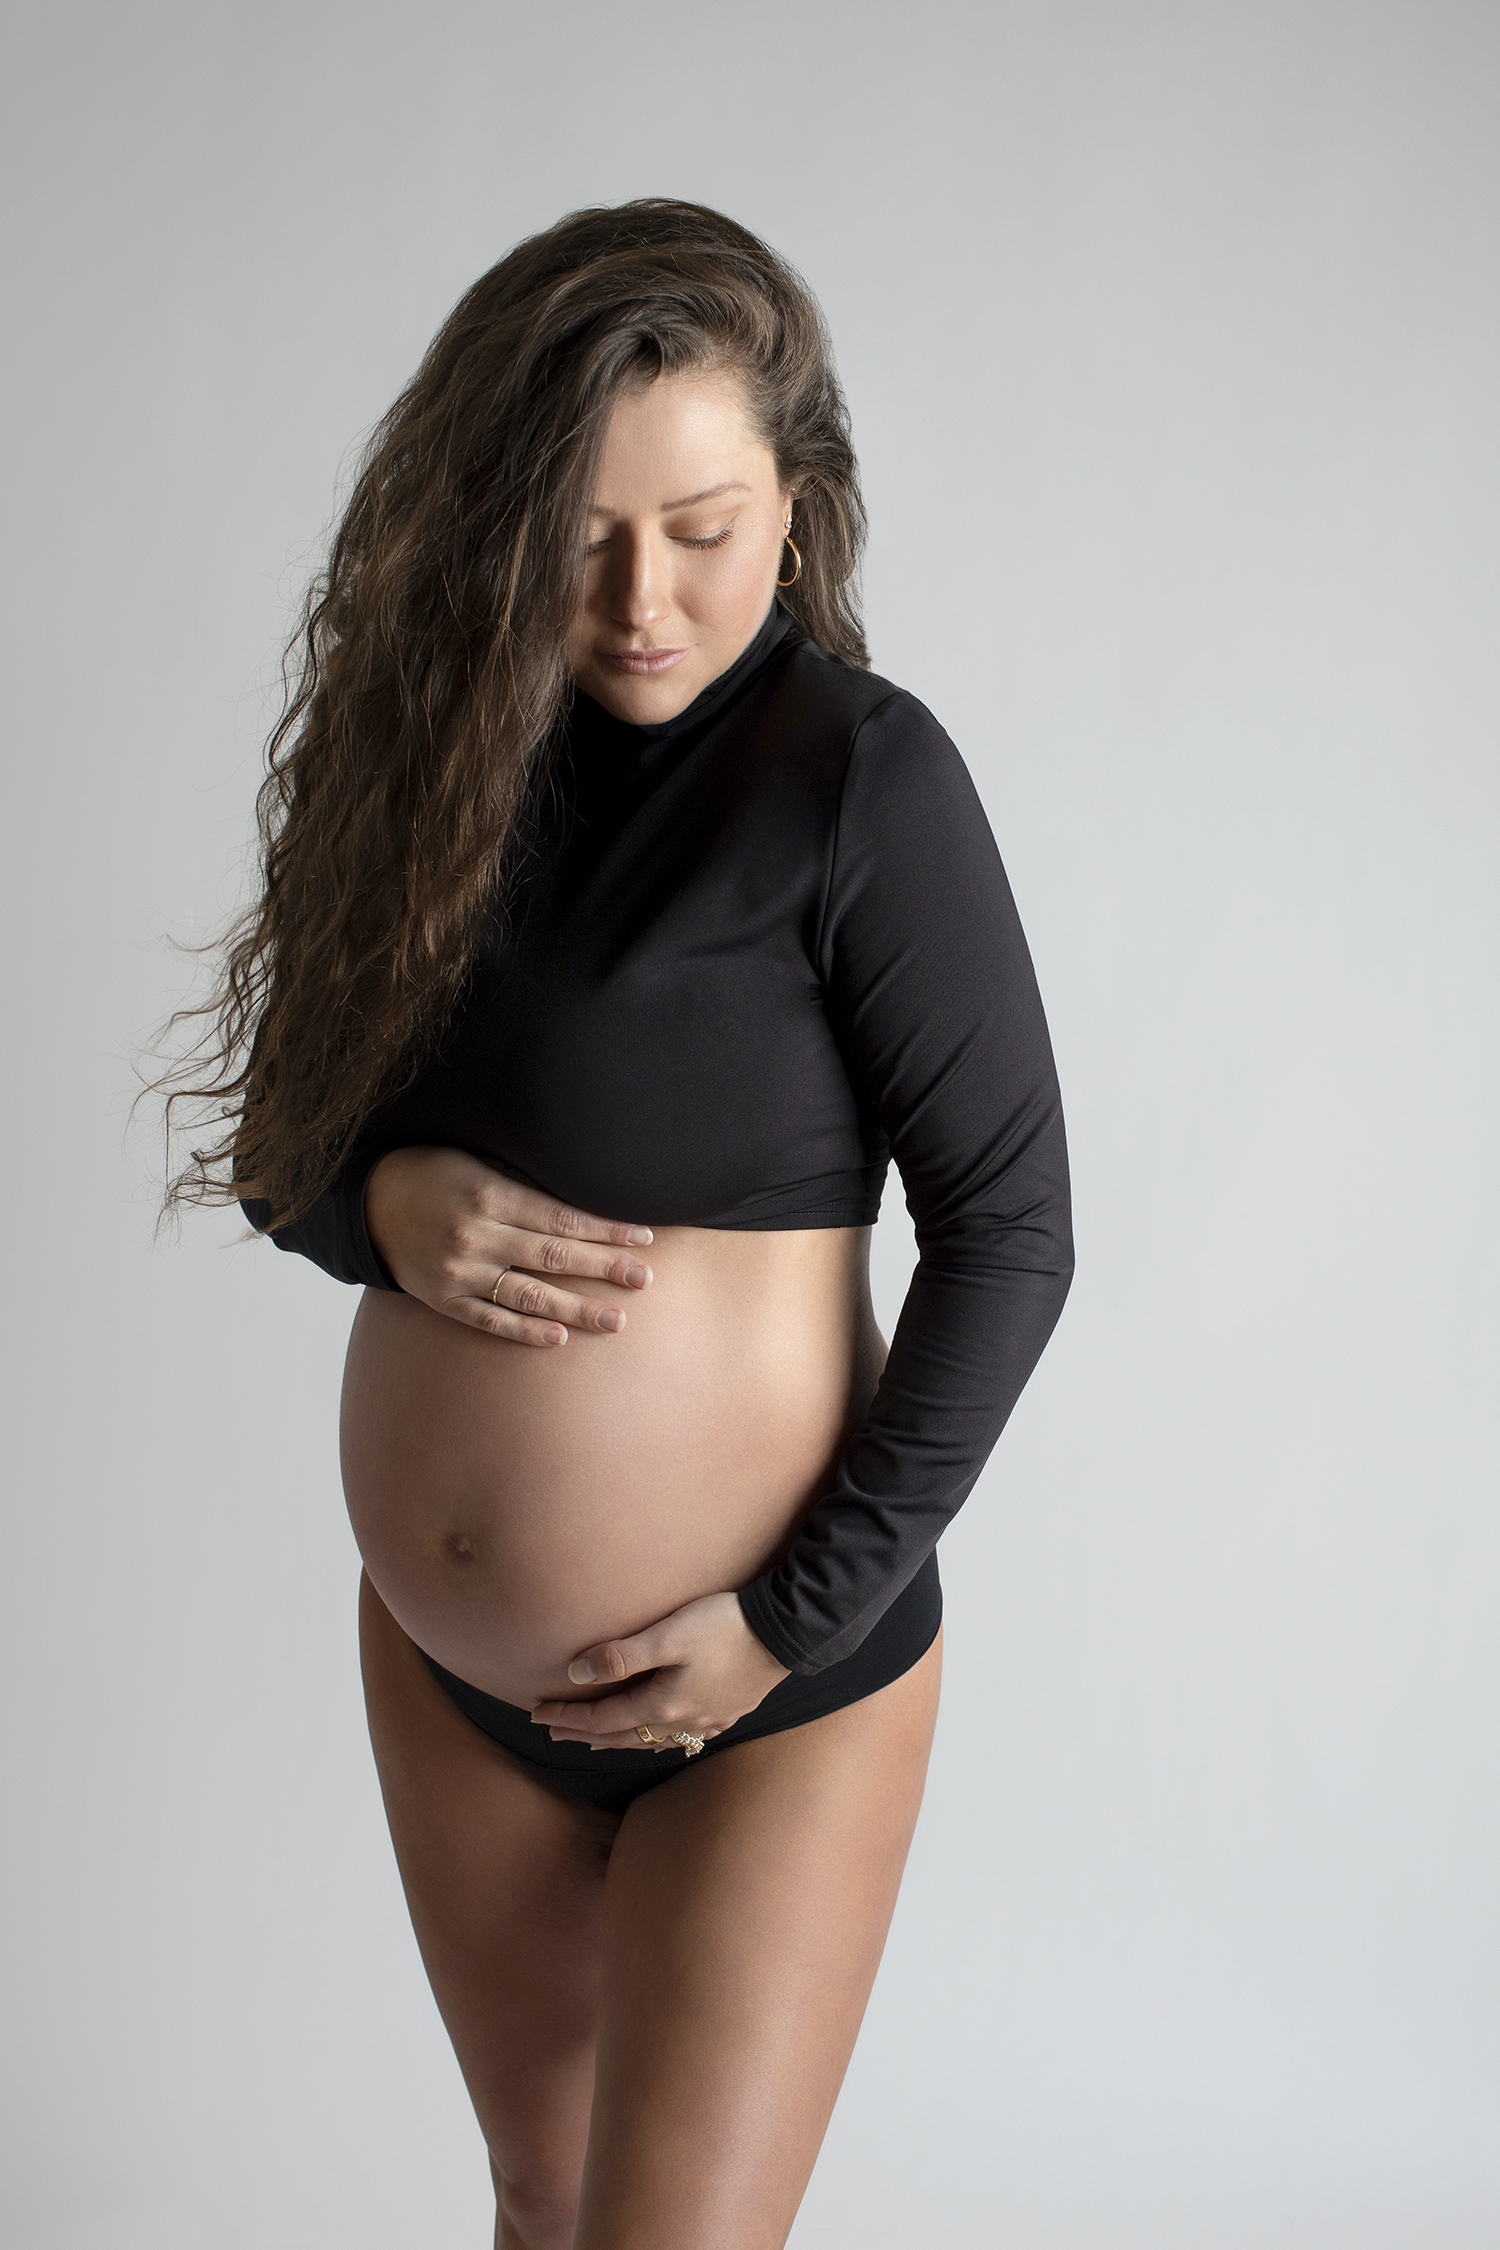 An elegant pregnant woman is captured in a luxury maternity photoshoot, exuding confidence and beauty.